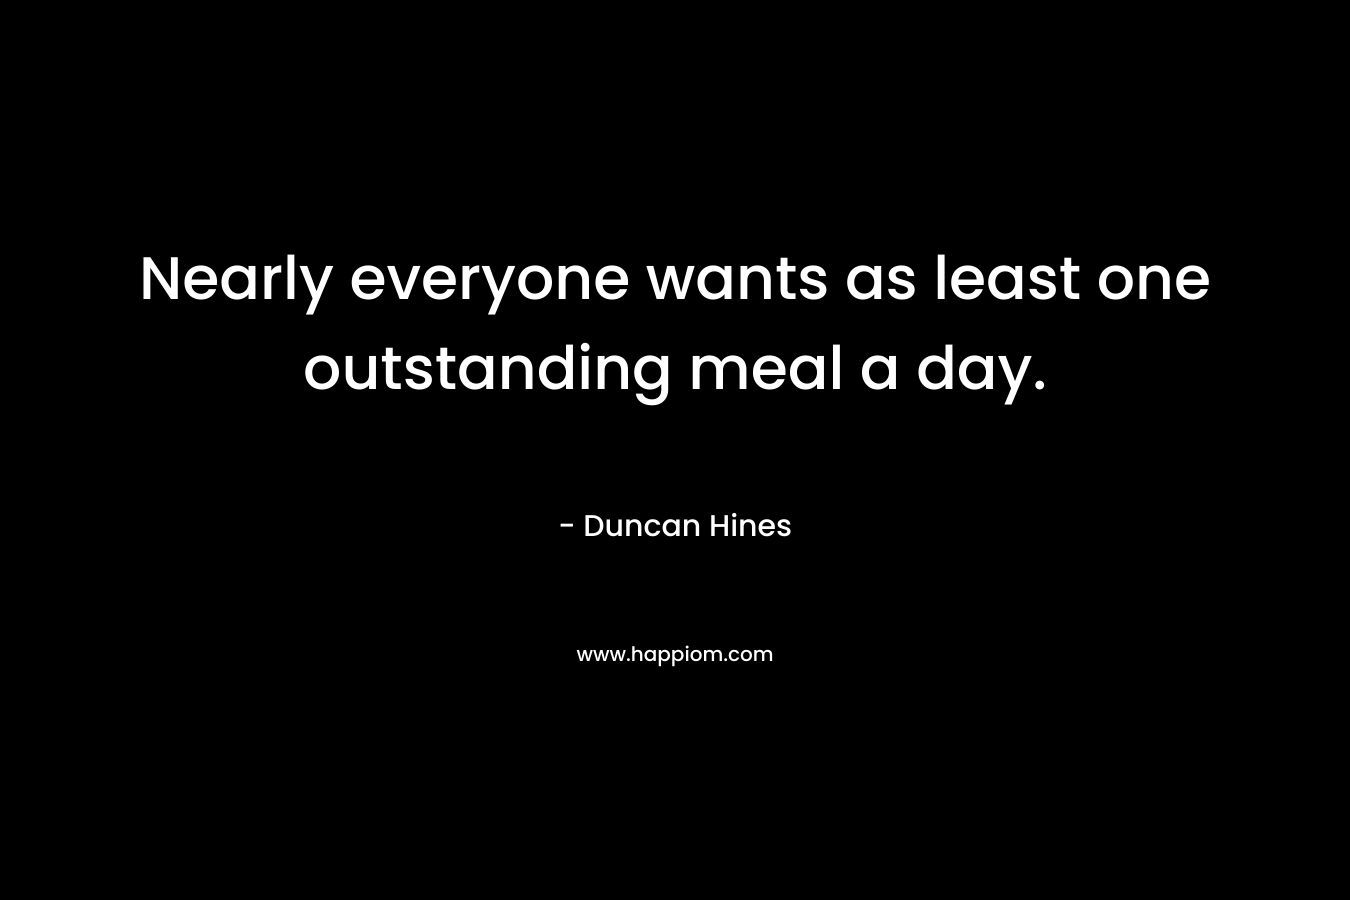 Nearly everyone wants as least one outstanding meal a day. – Duncan Hines